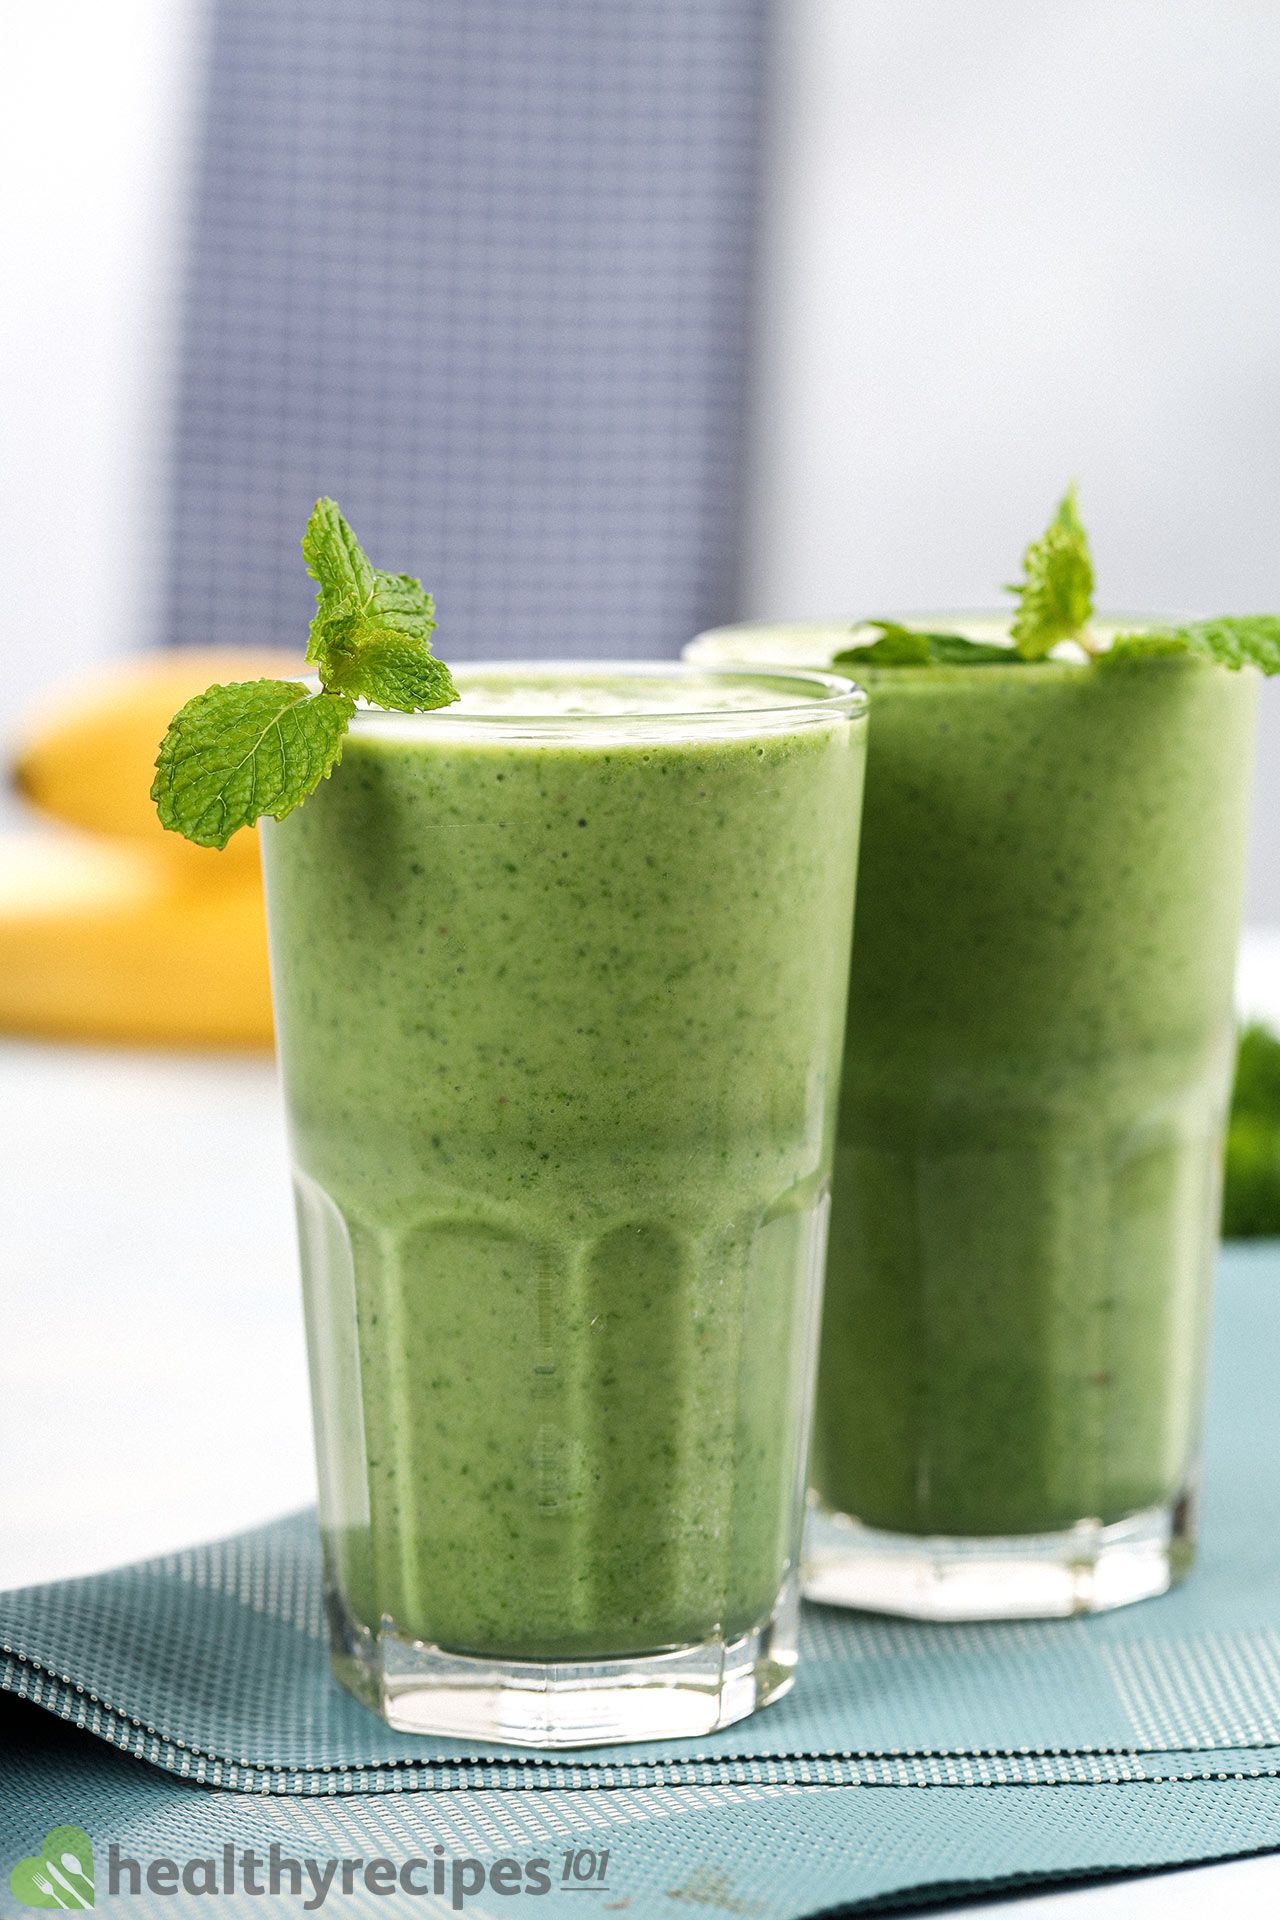 How Long Does Kale Banana Smoothie Last